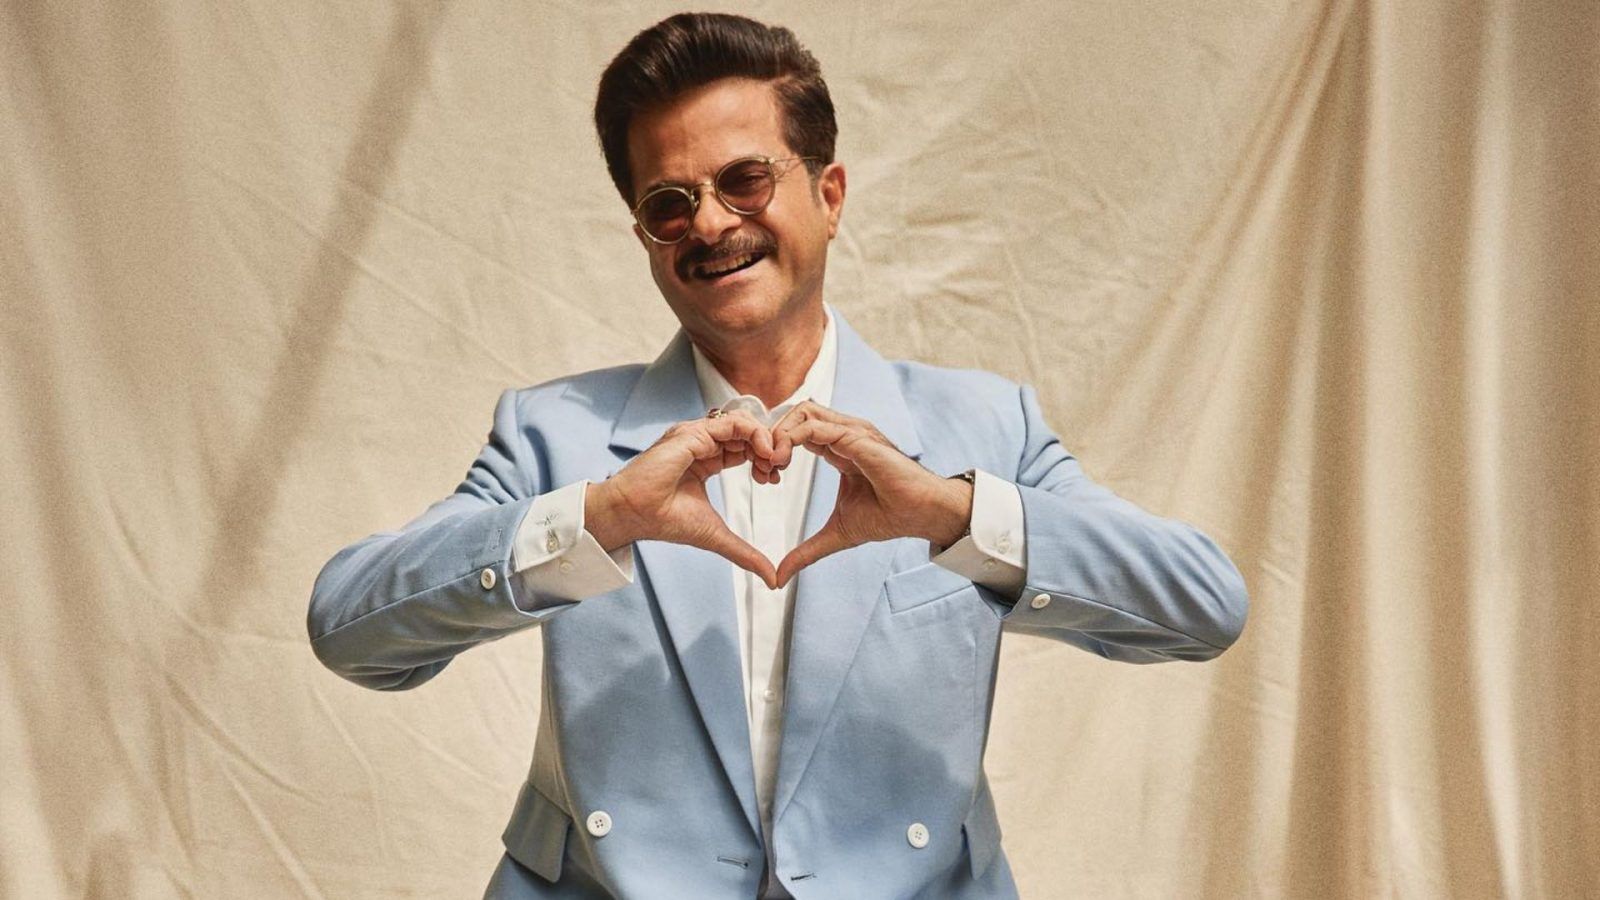 Physical fitness secret behind Anil Kapoor's dashing looks